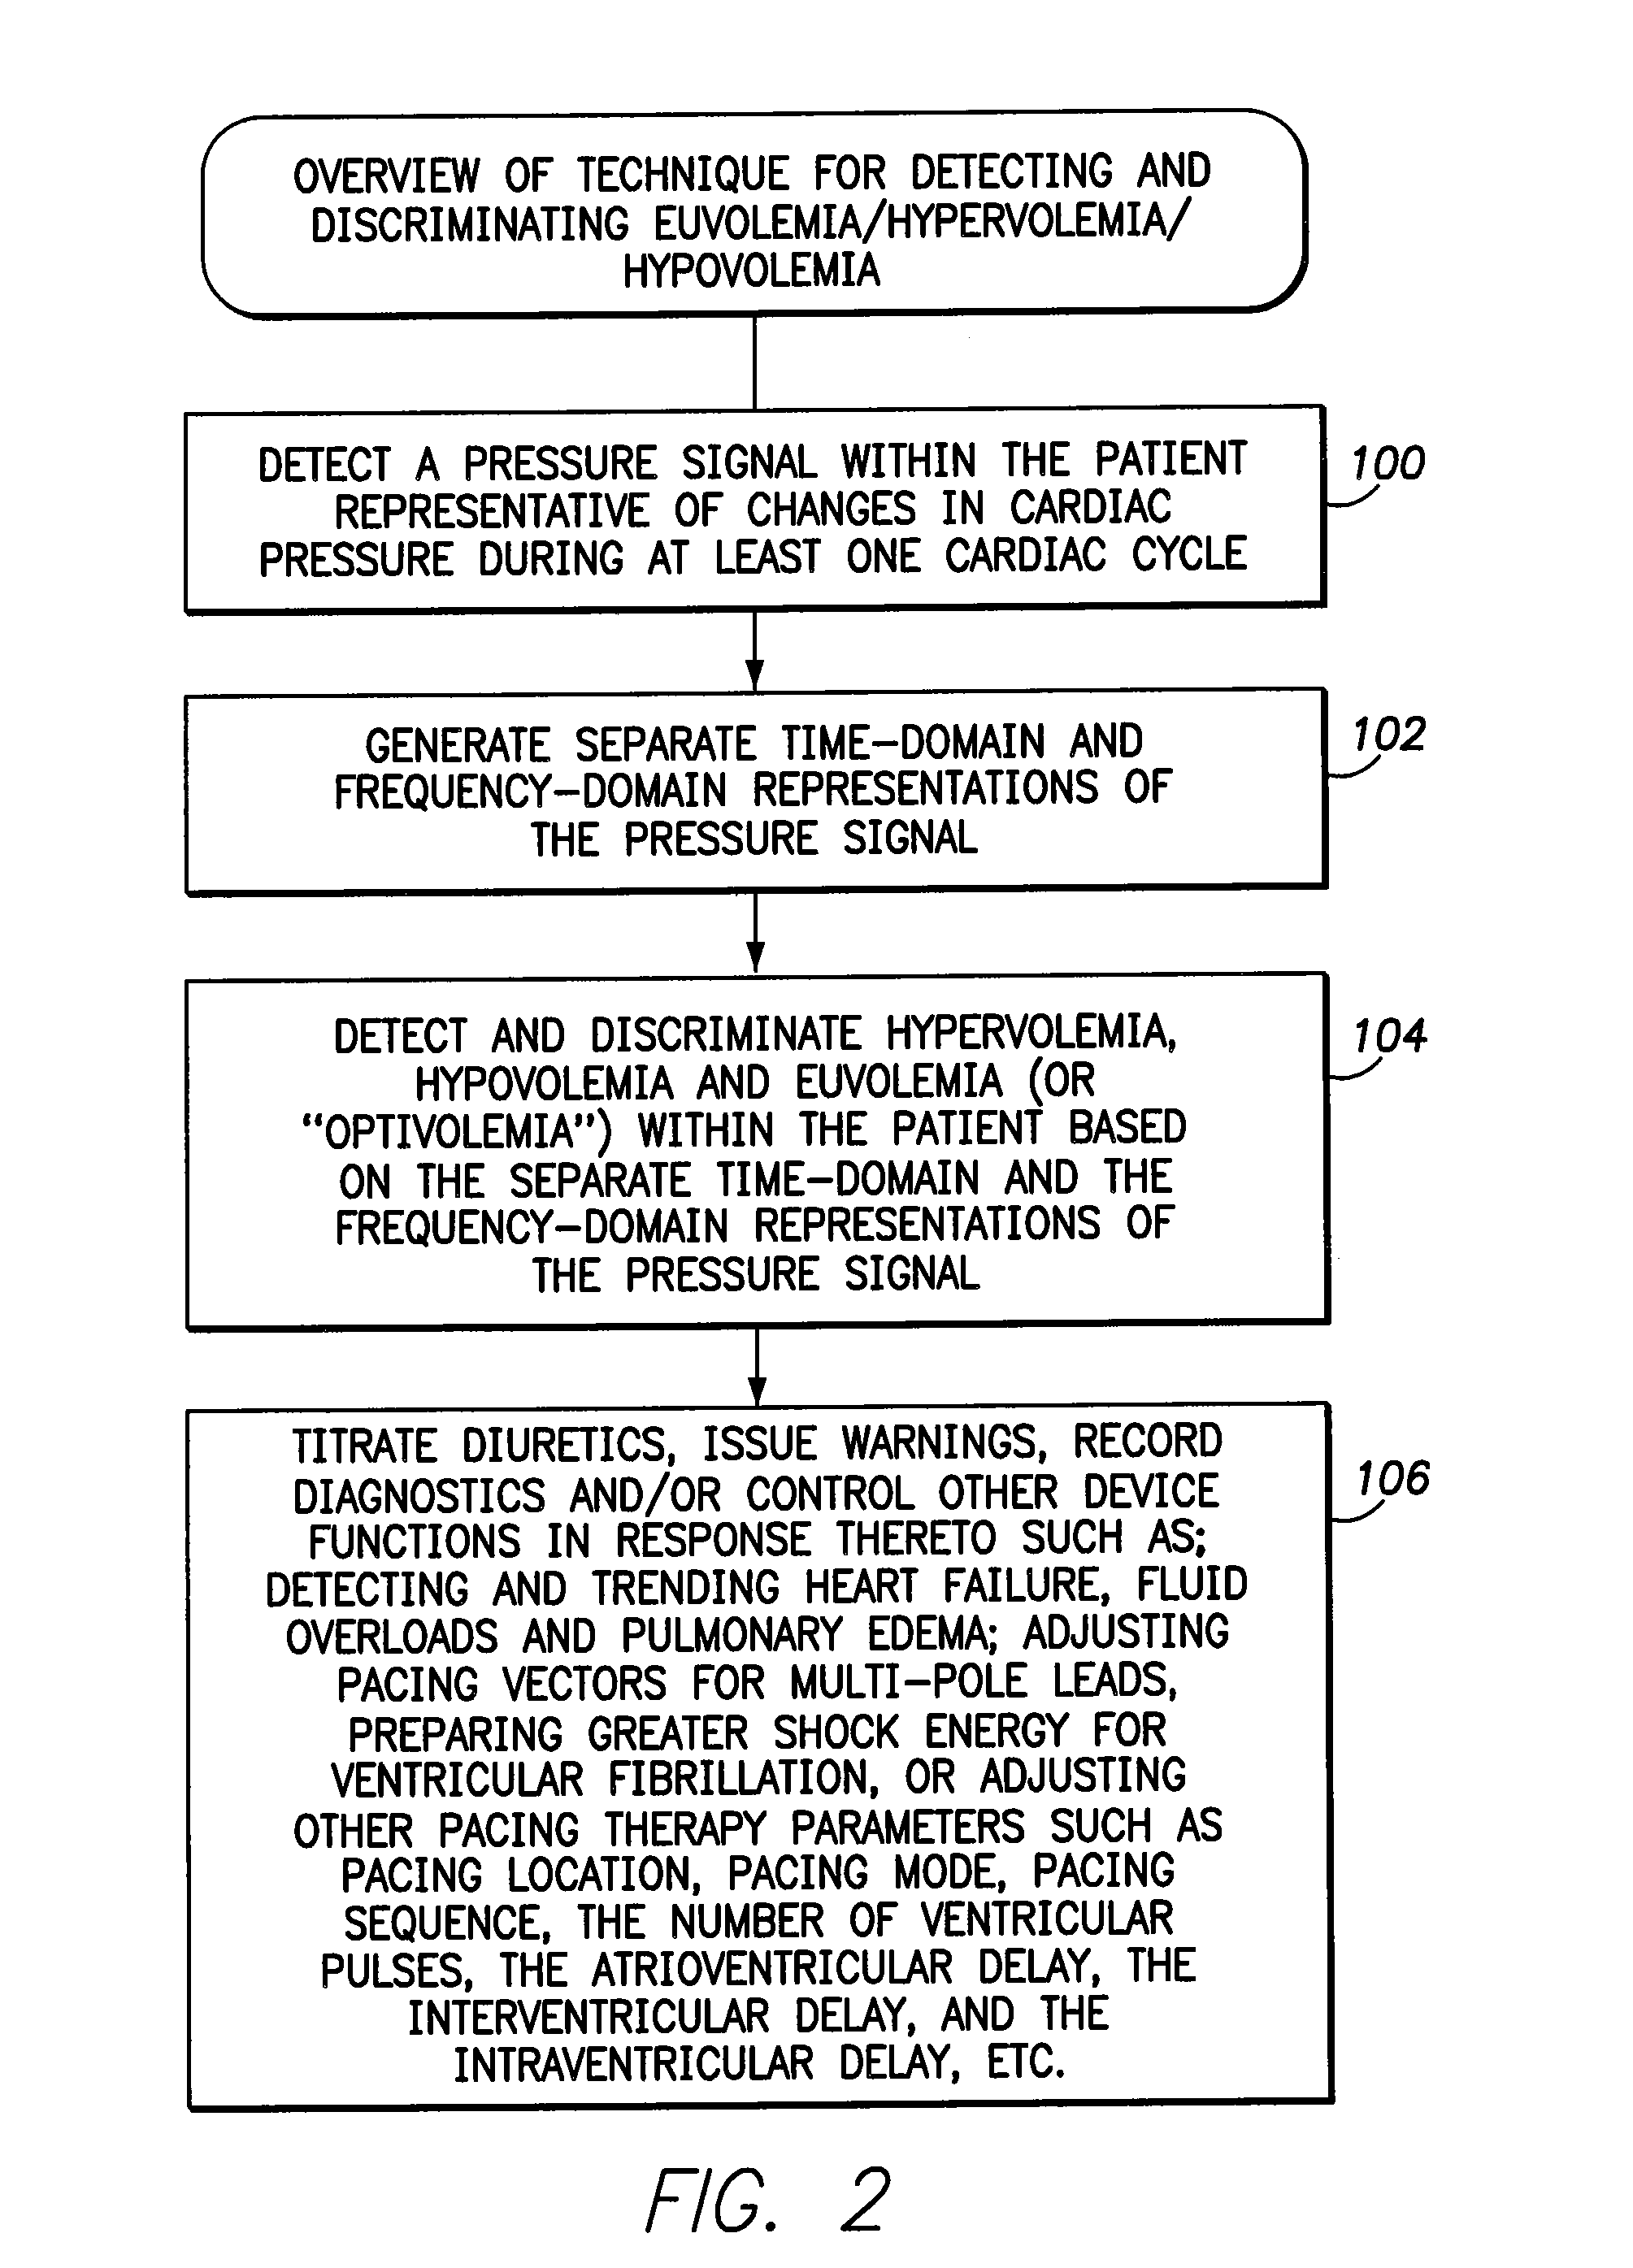 System and method for discriminating hypervolemia, hypovolemia and euvolemia using an implantable medical device